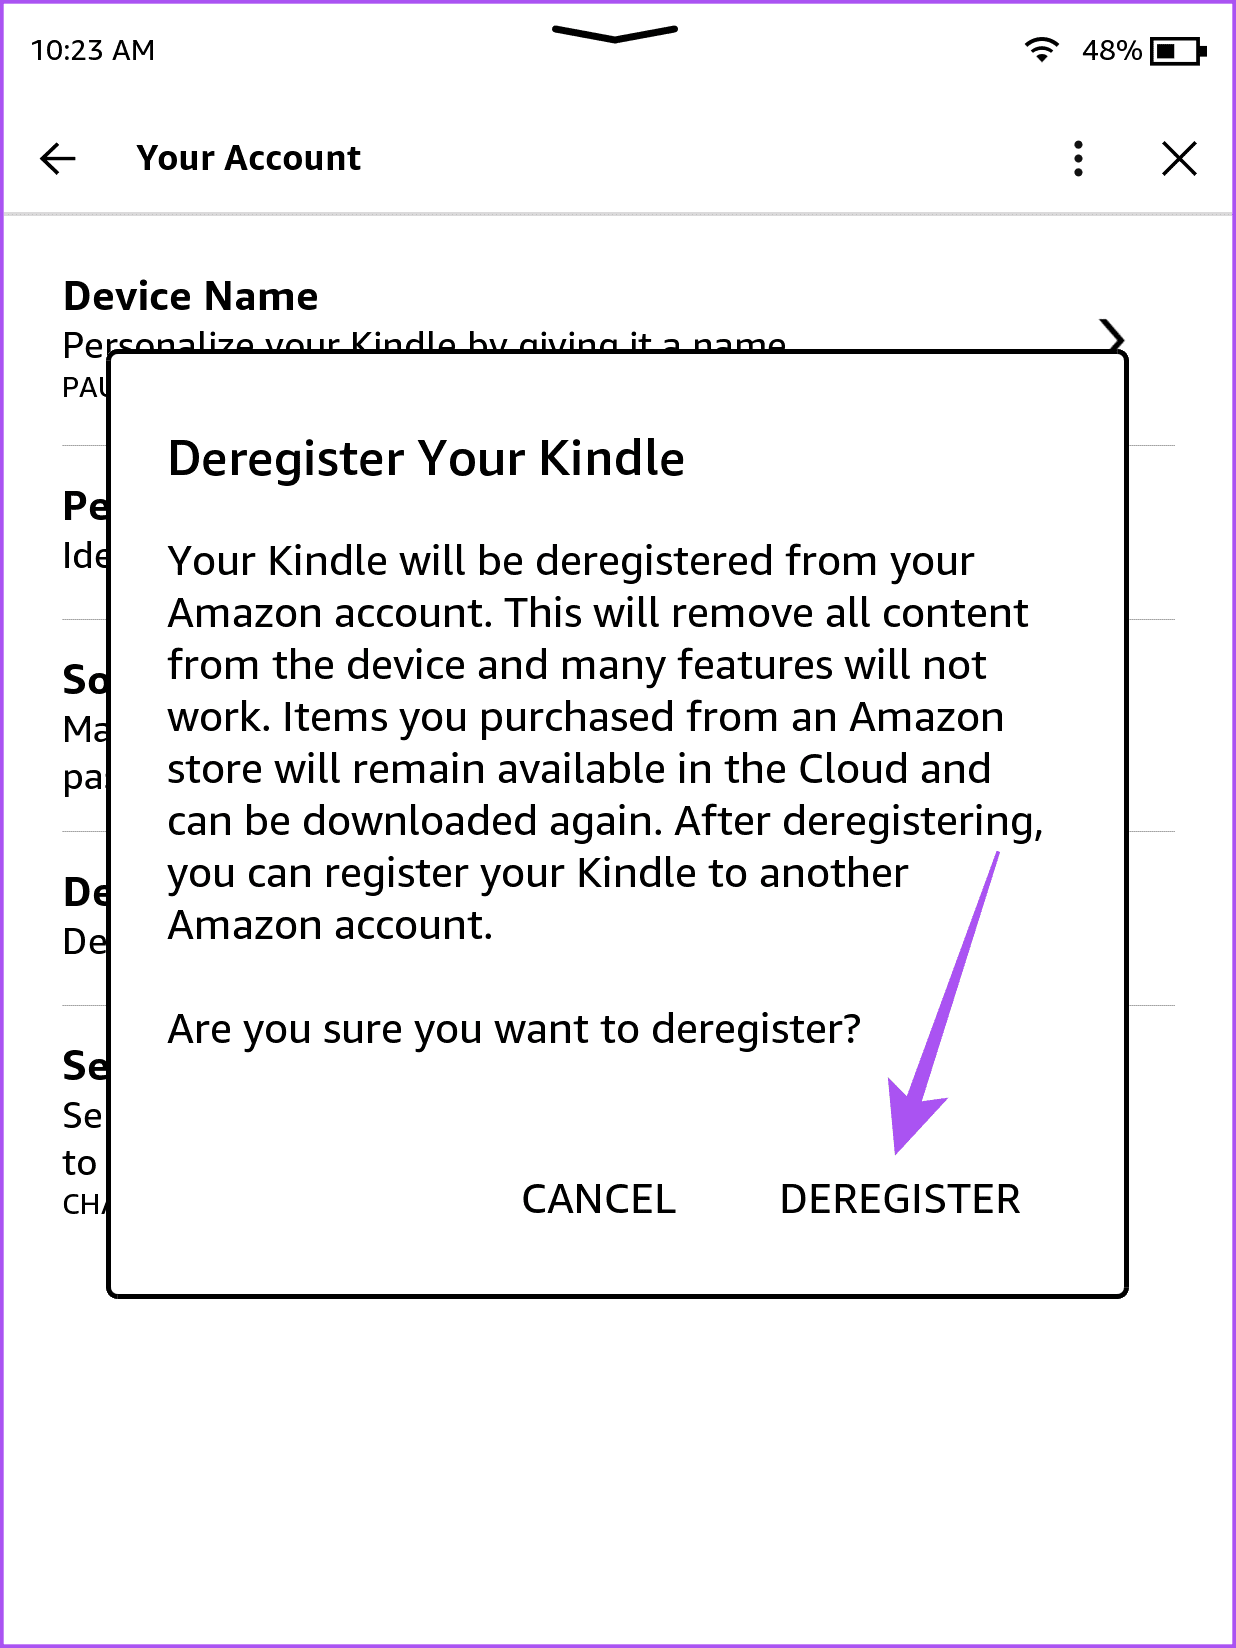 deregister your kindle from amazon account